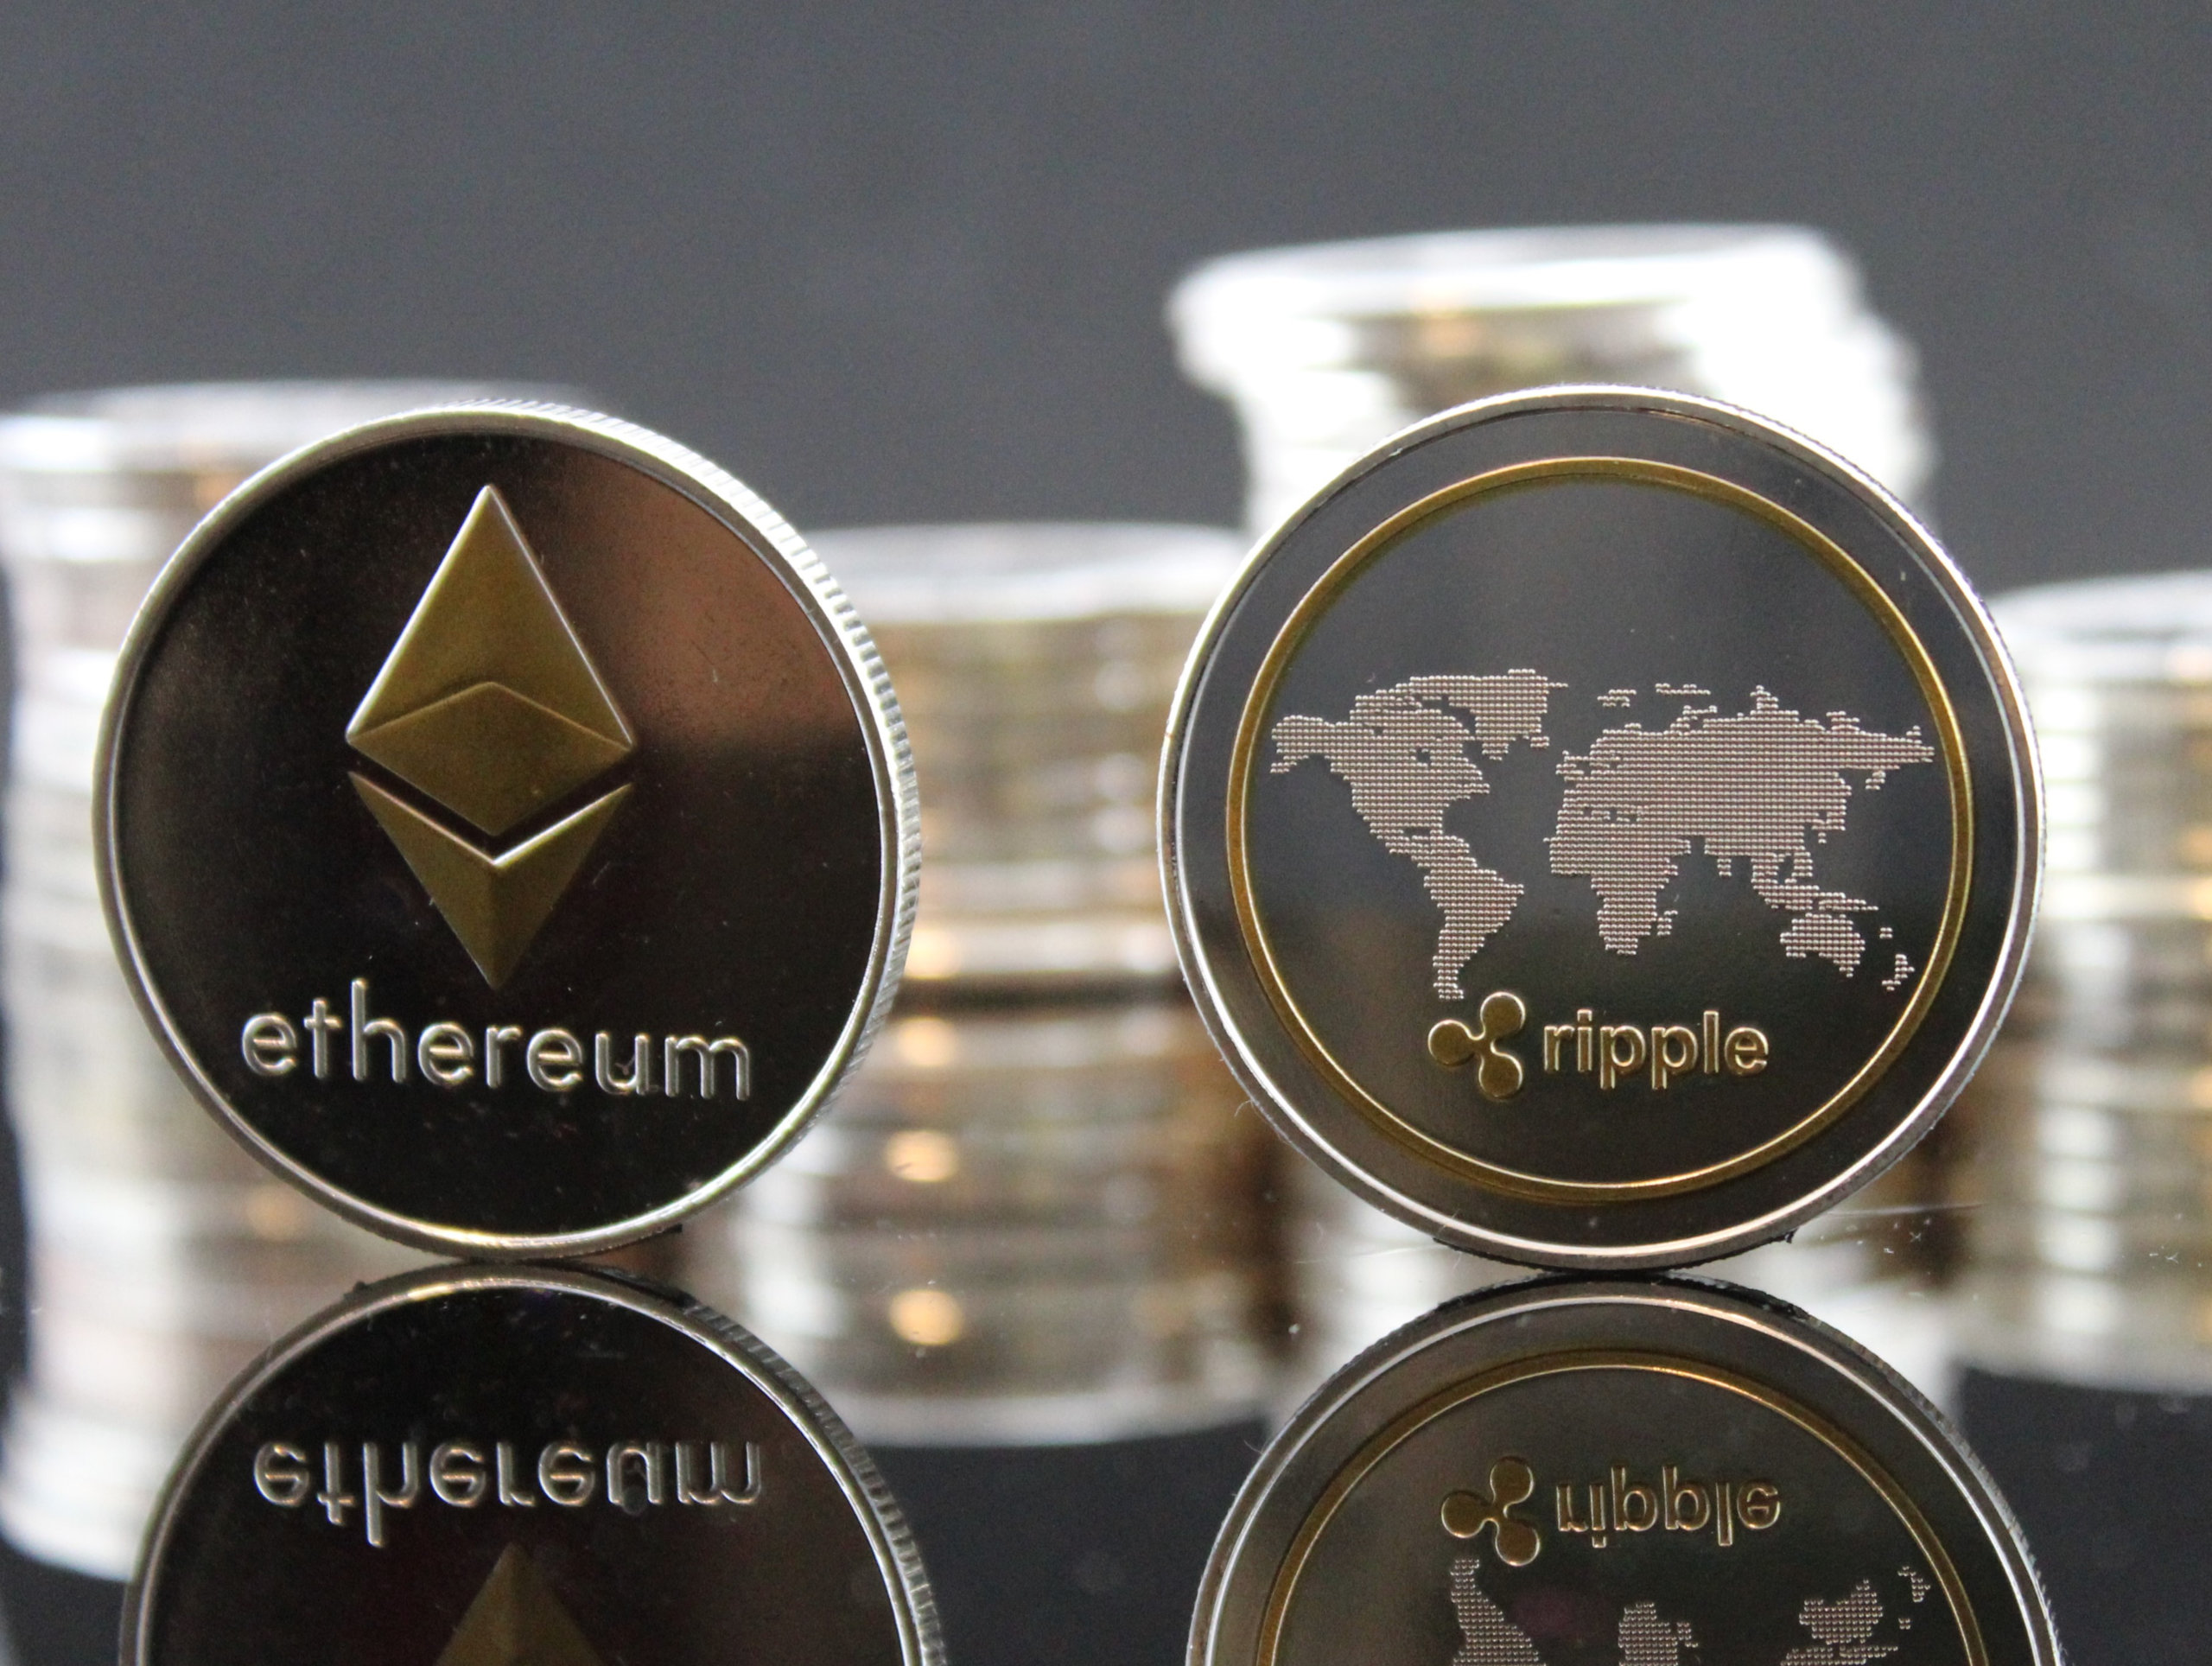 Ripple CEO claims ETH is above XRP due to SEC